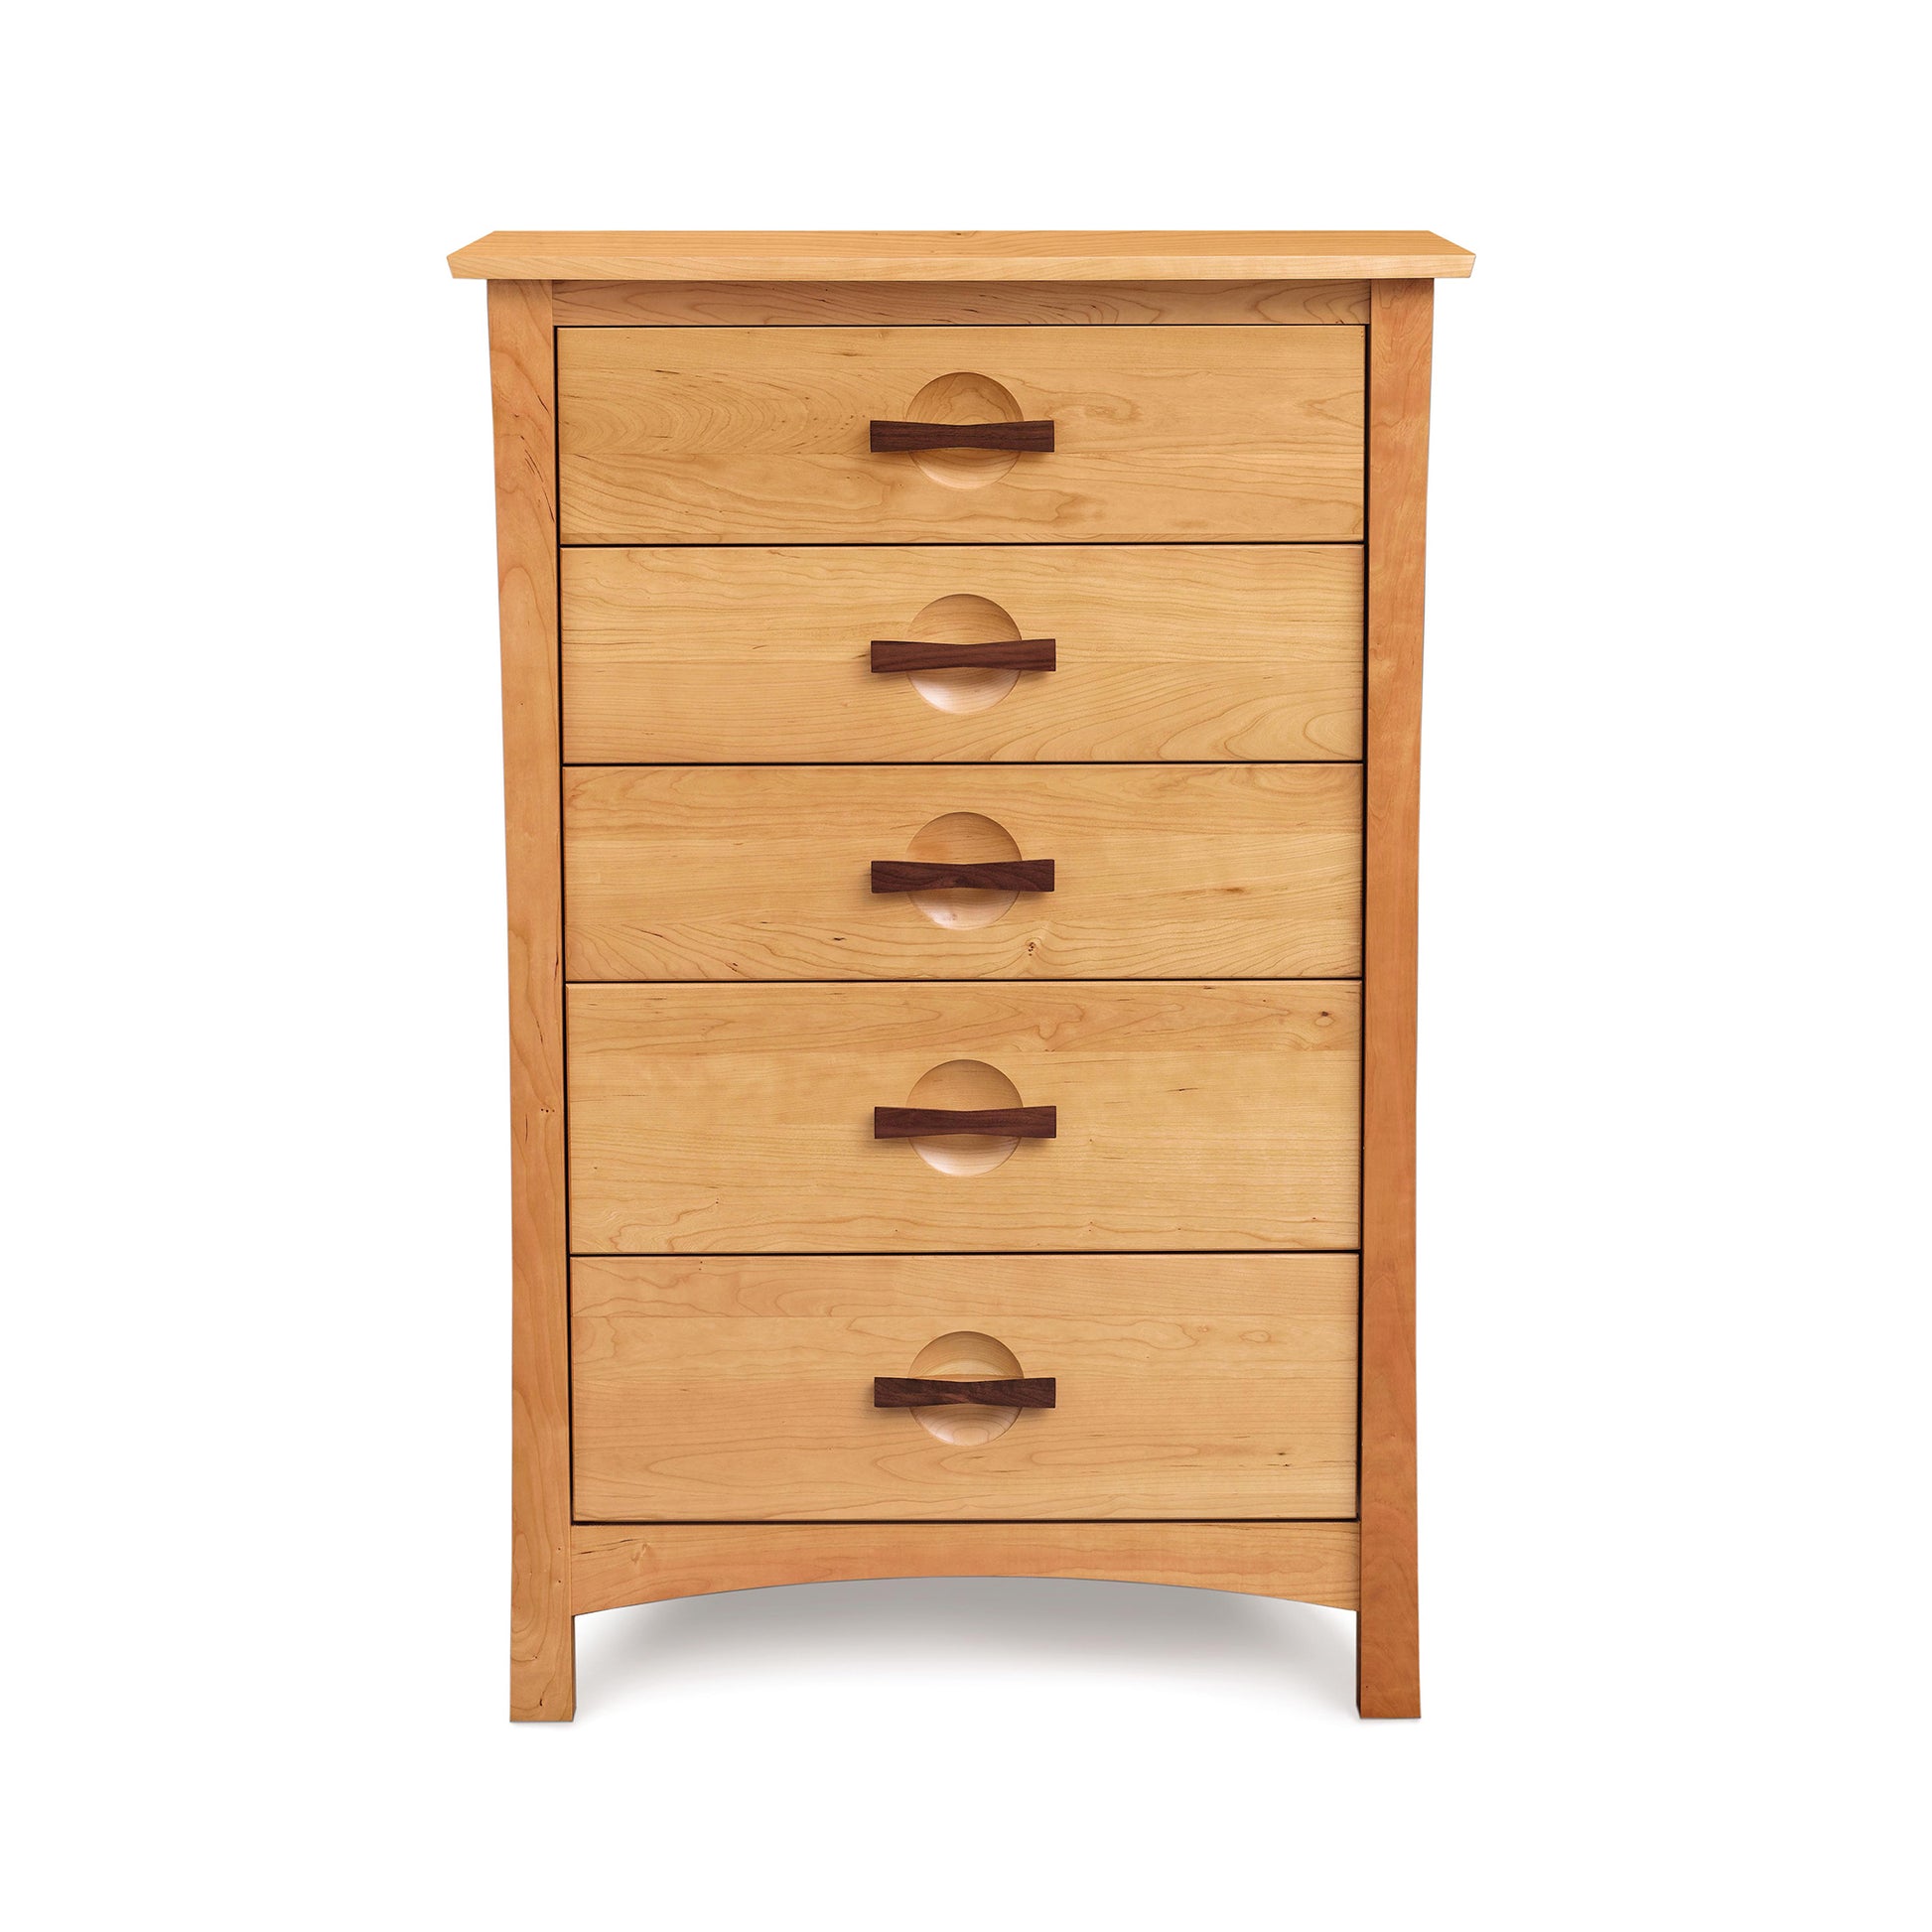 A wooden chest of drawers with four drawers.